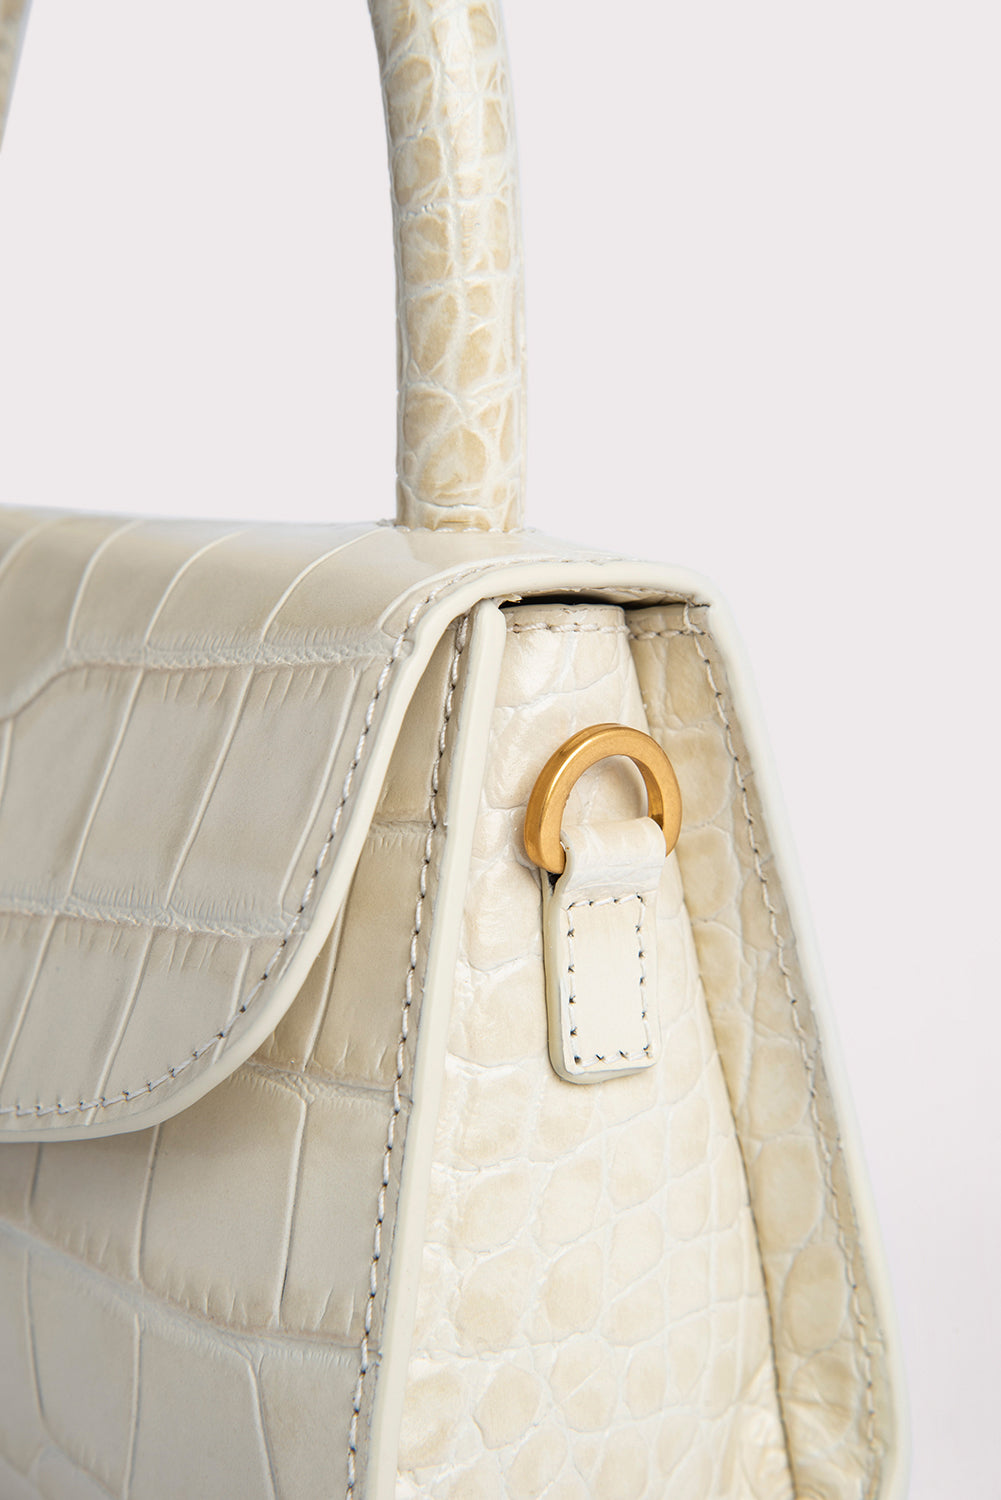 Embossed leather tote